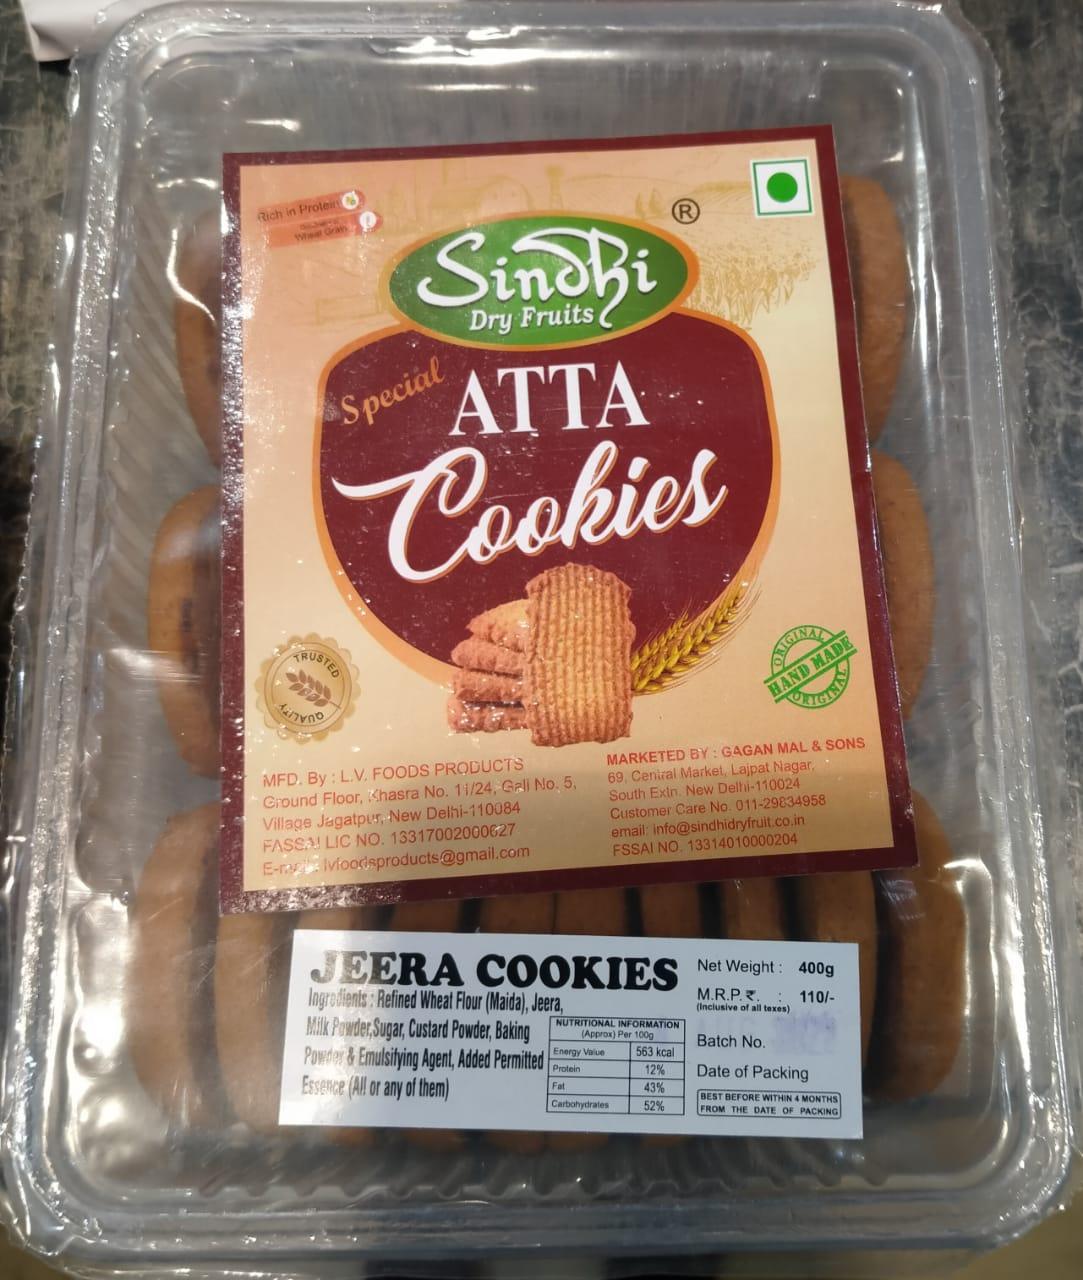 Delicious salted aata cookies available online at Sindhi Dry Fruits - order now!